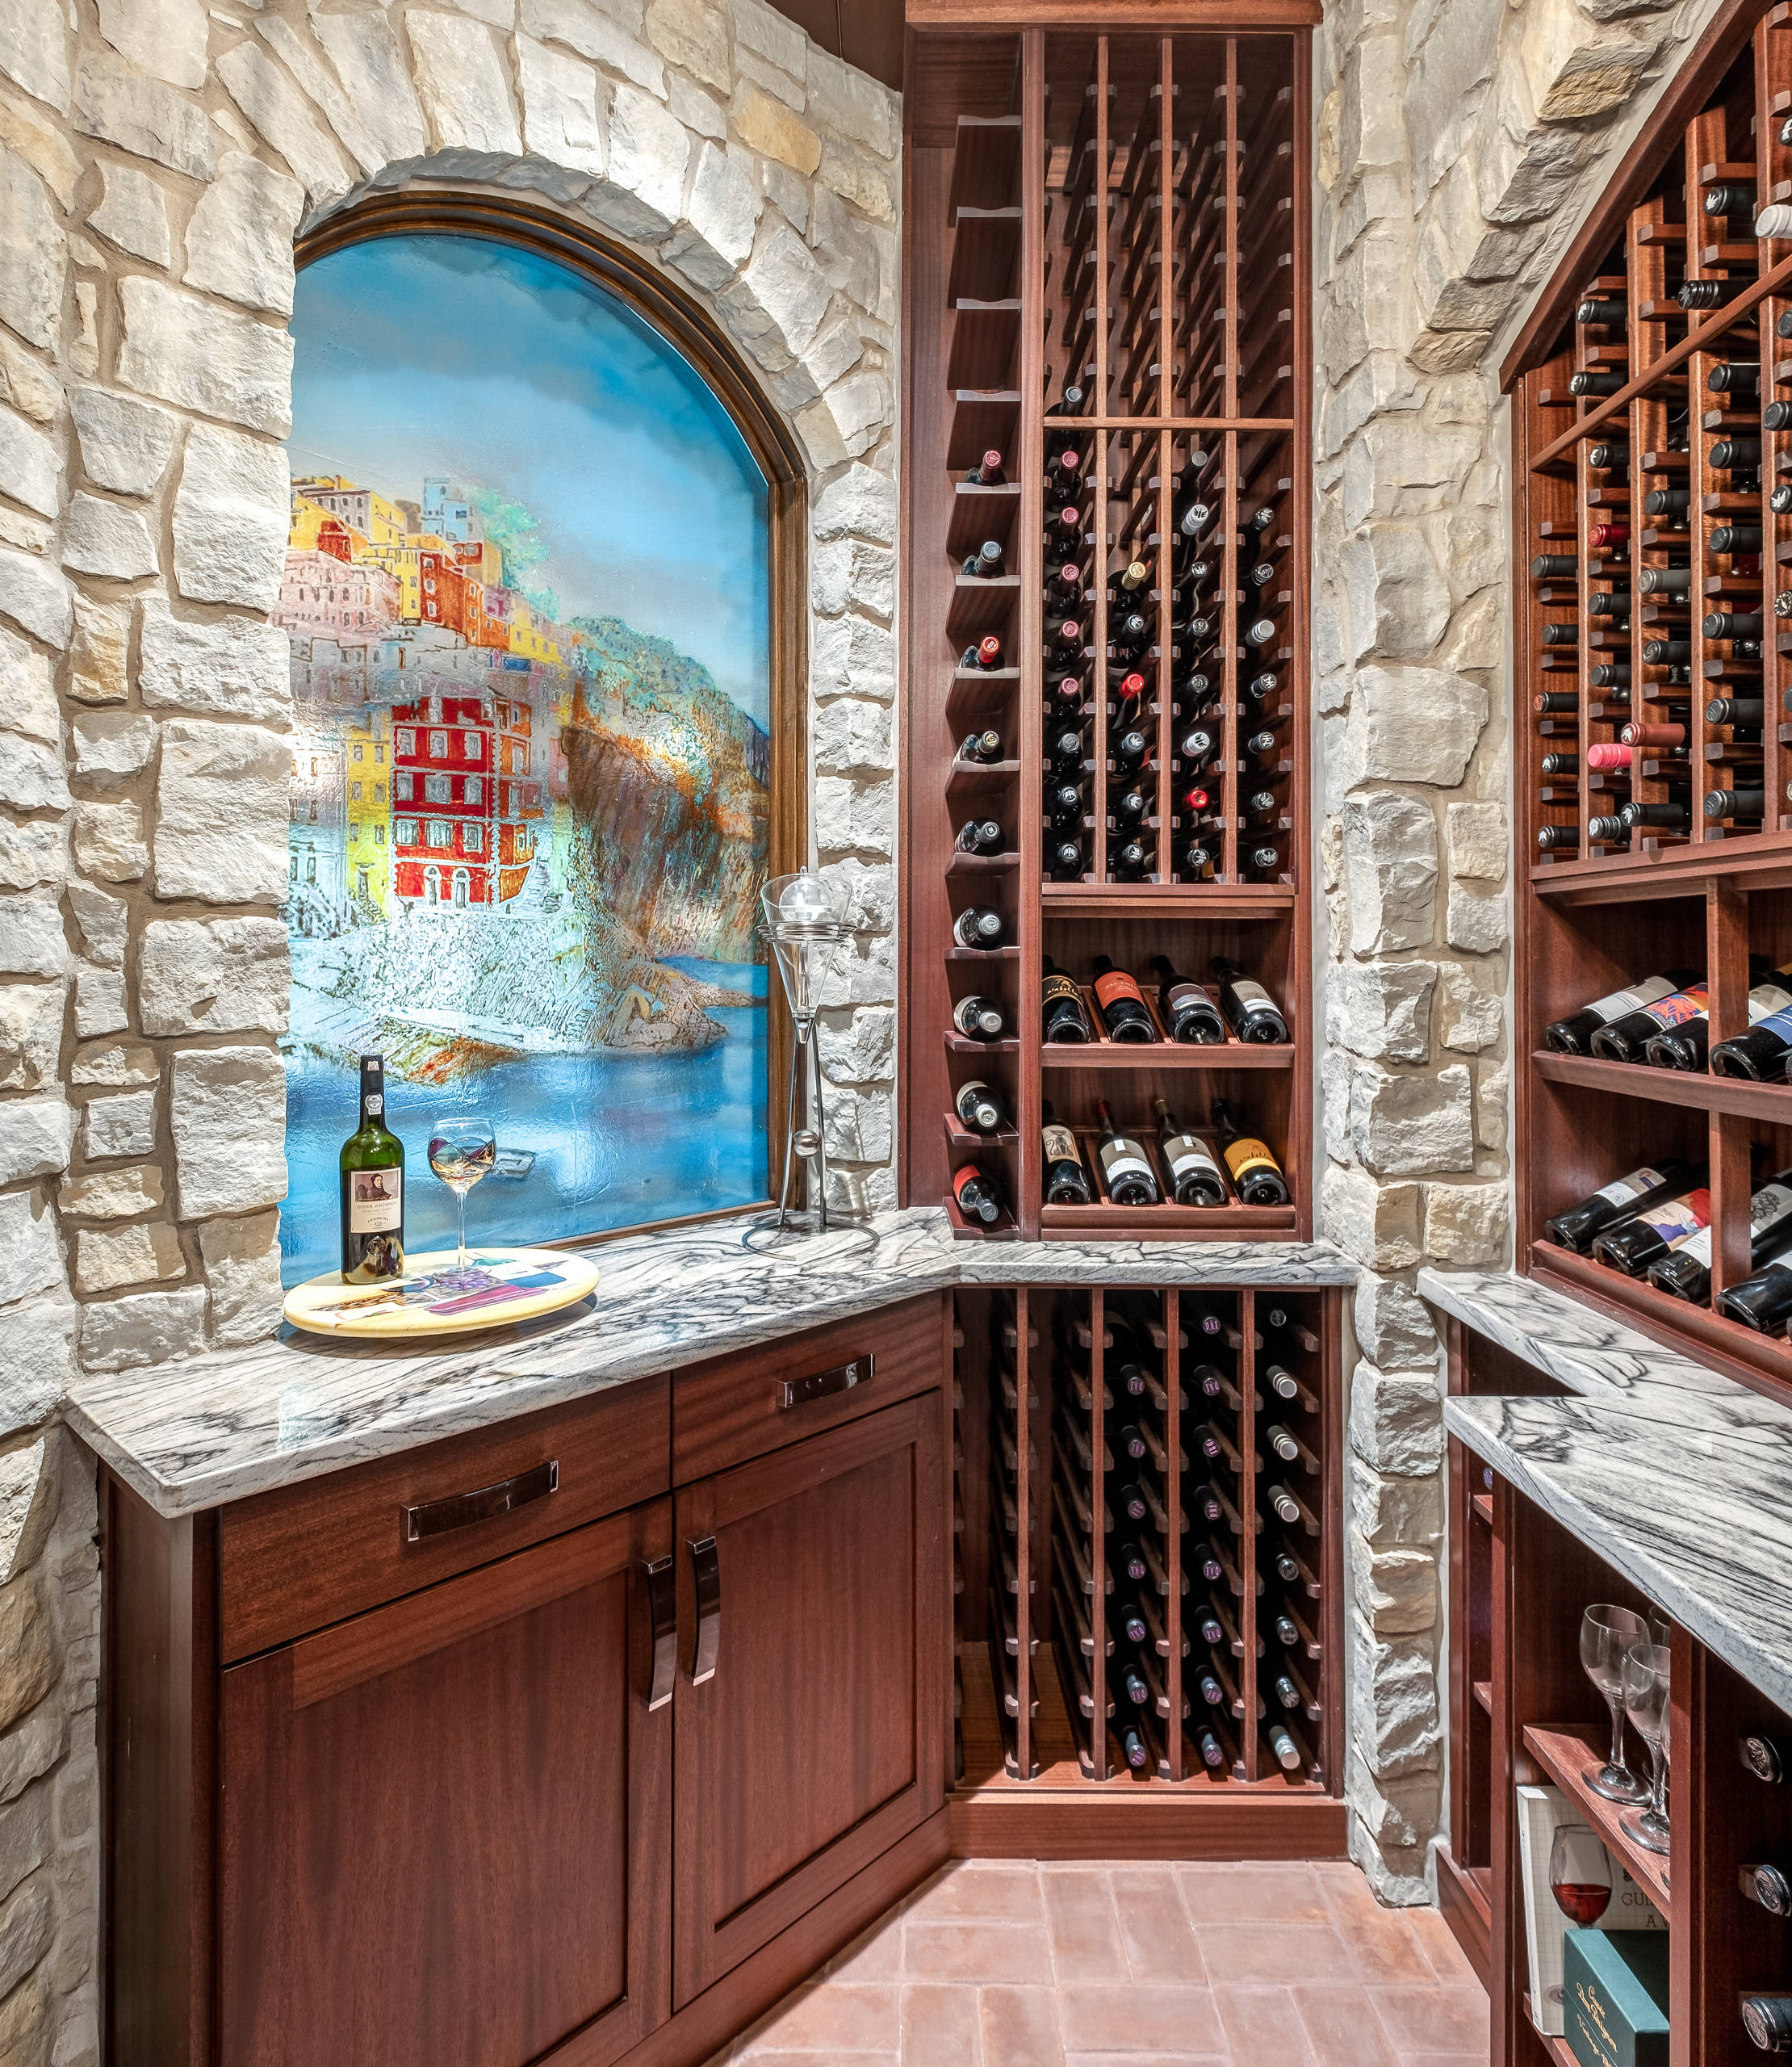 Wine Cellar Inspirations From The Mediterranean